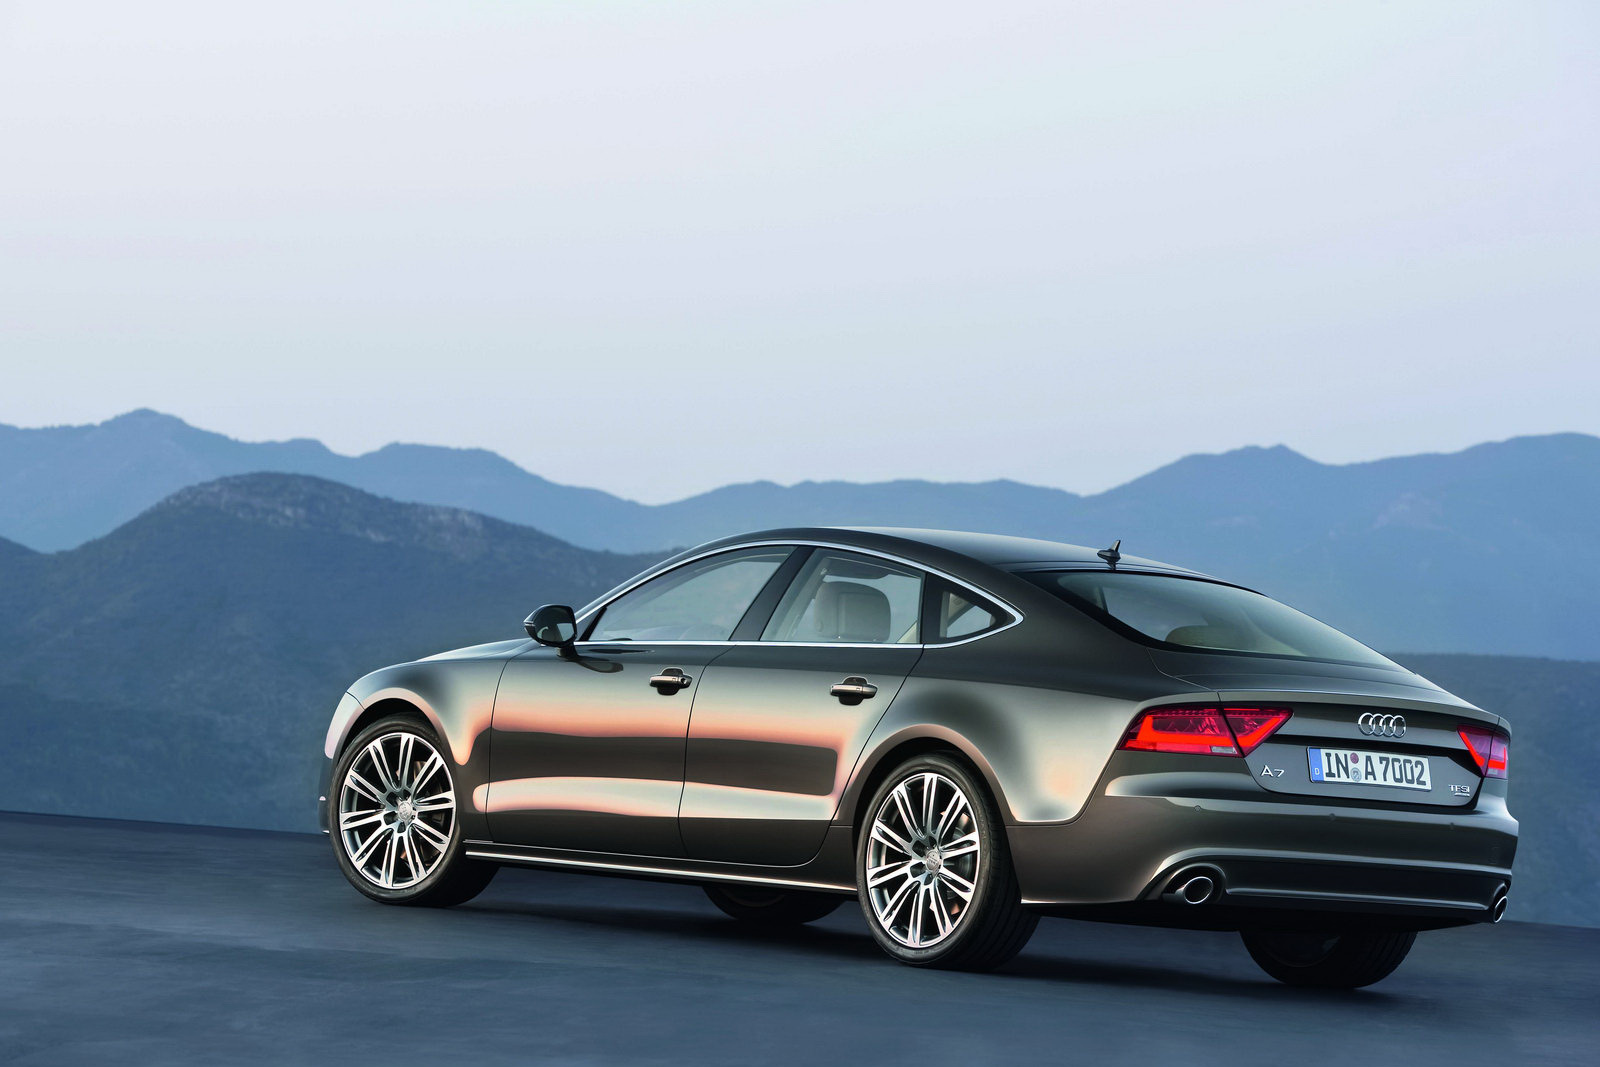 Audi A7 Exterior Side View